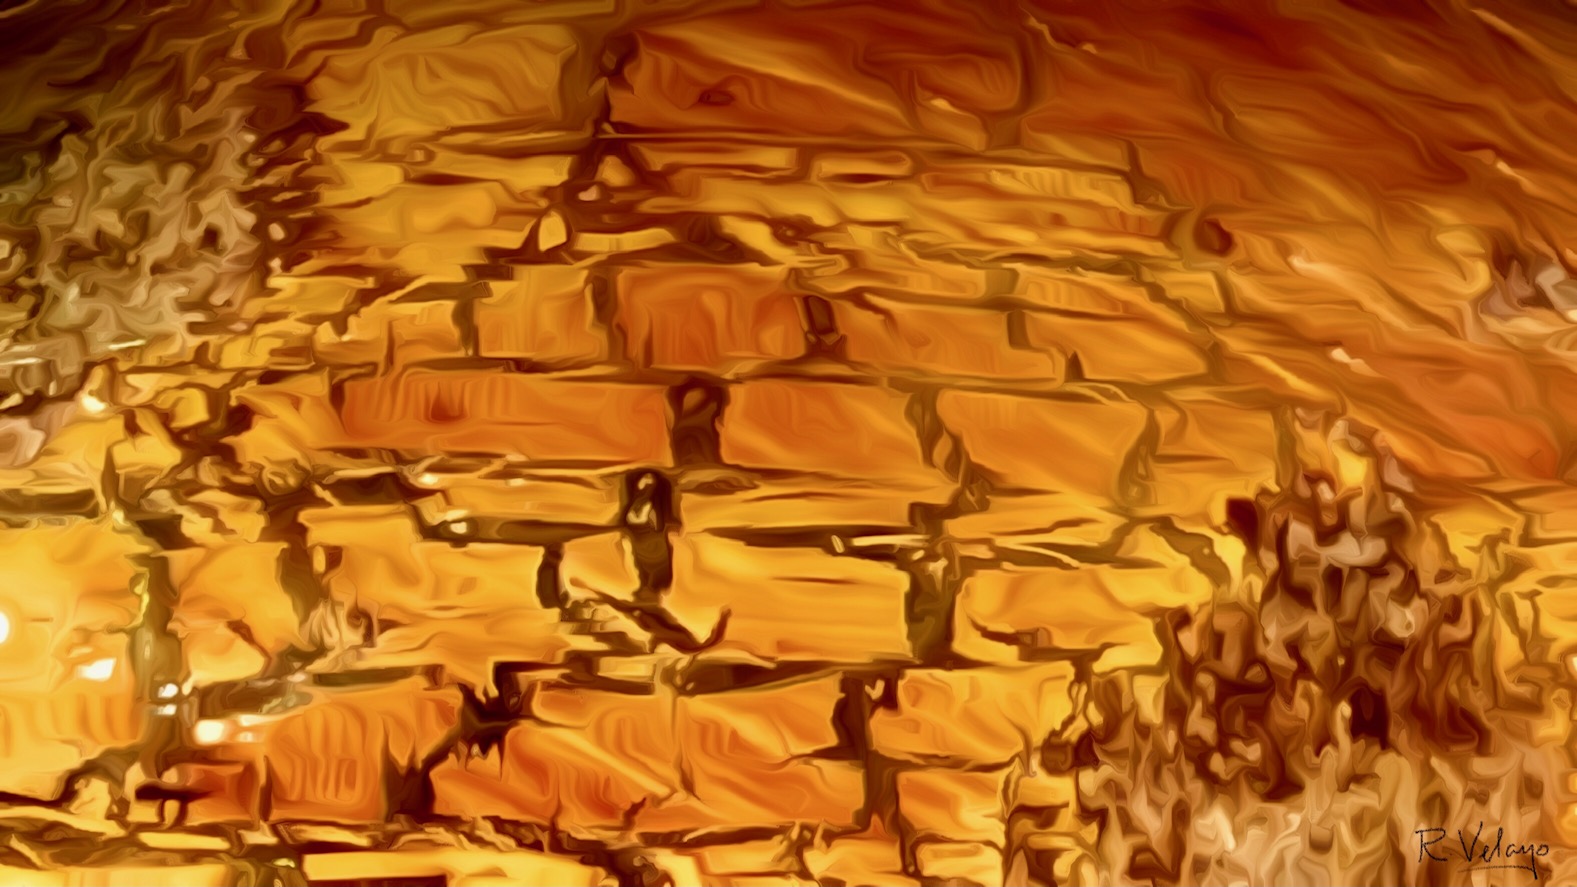 "ORGANIC PATTERNS IN AMBER" [Created: 11/17/2021]